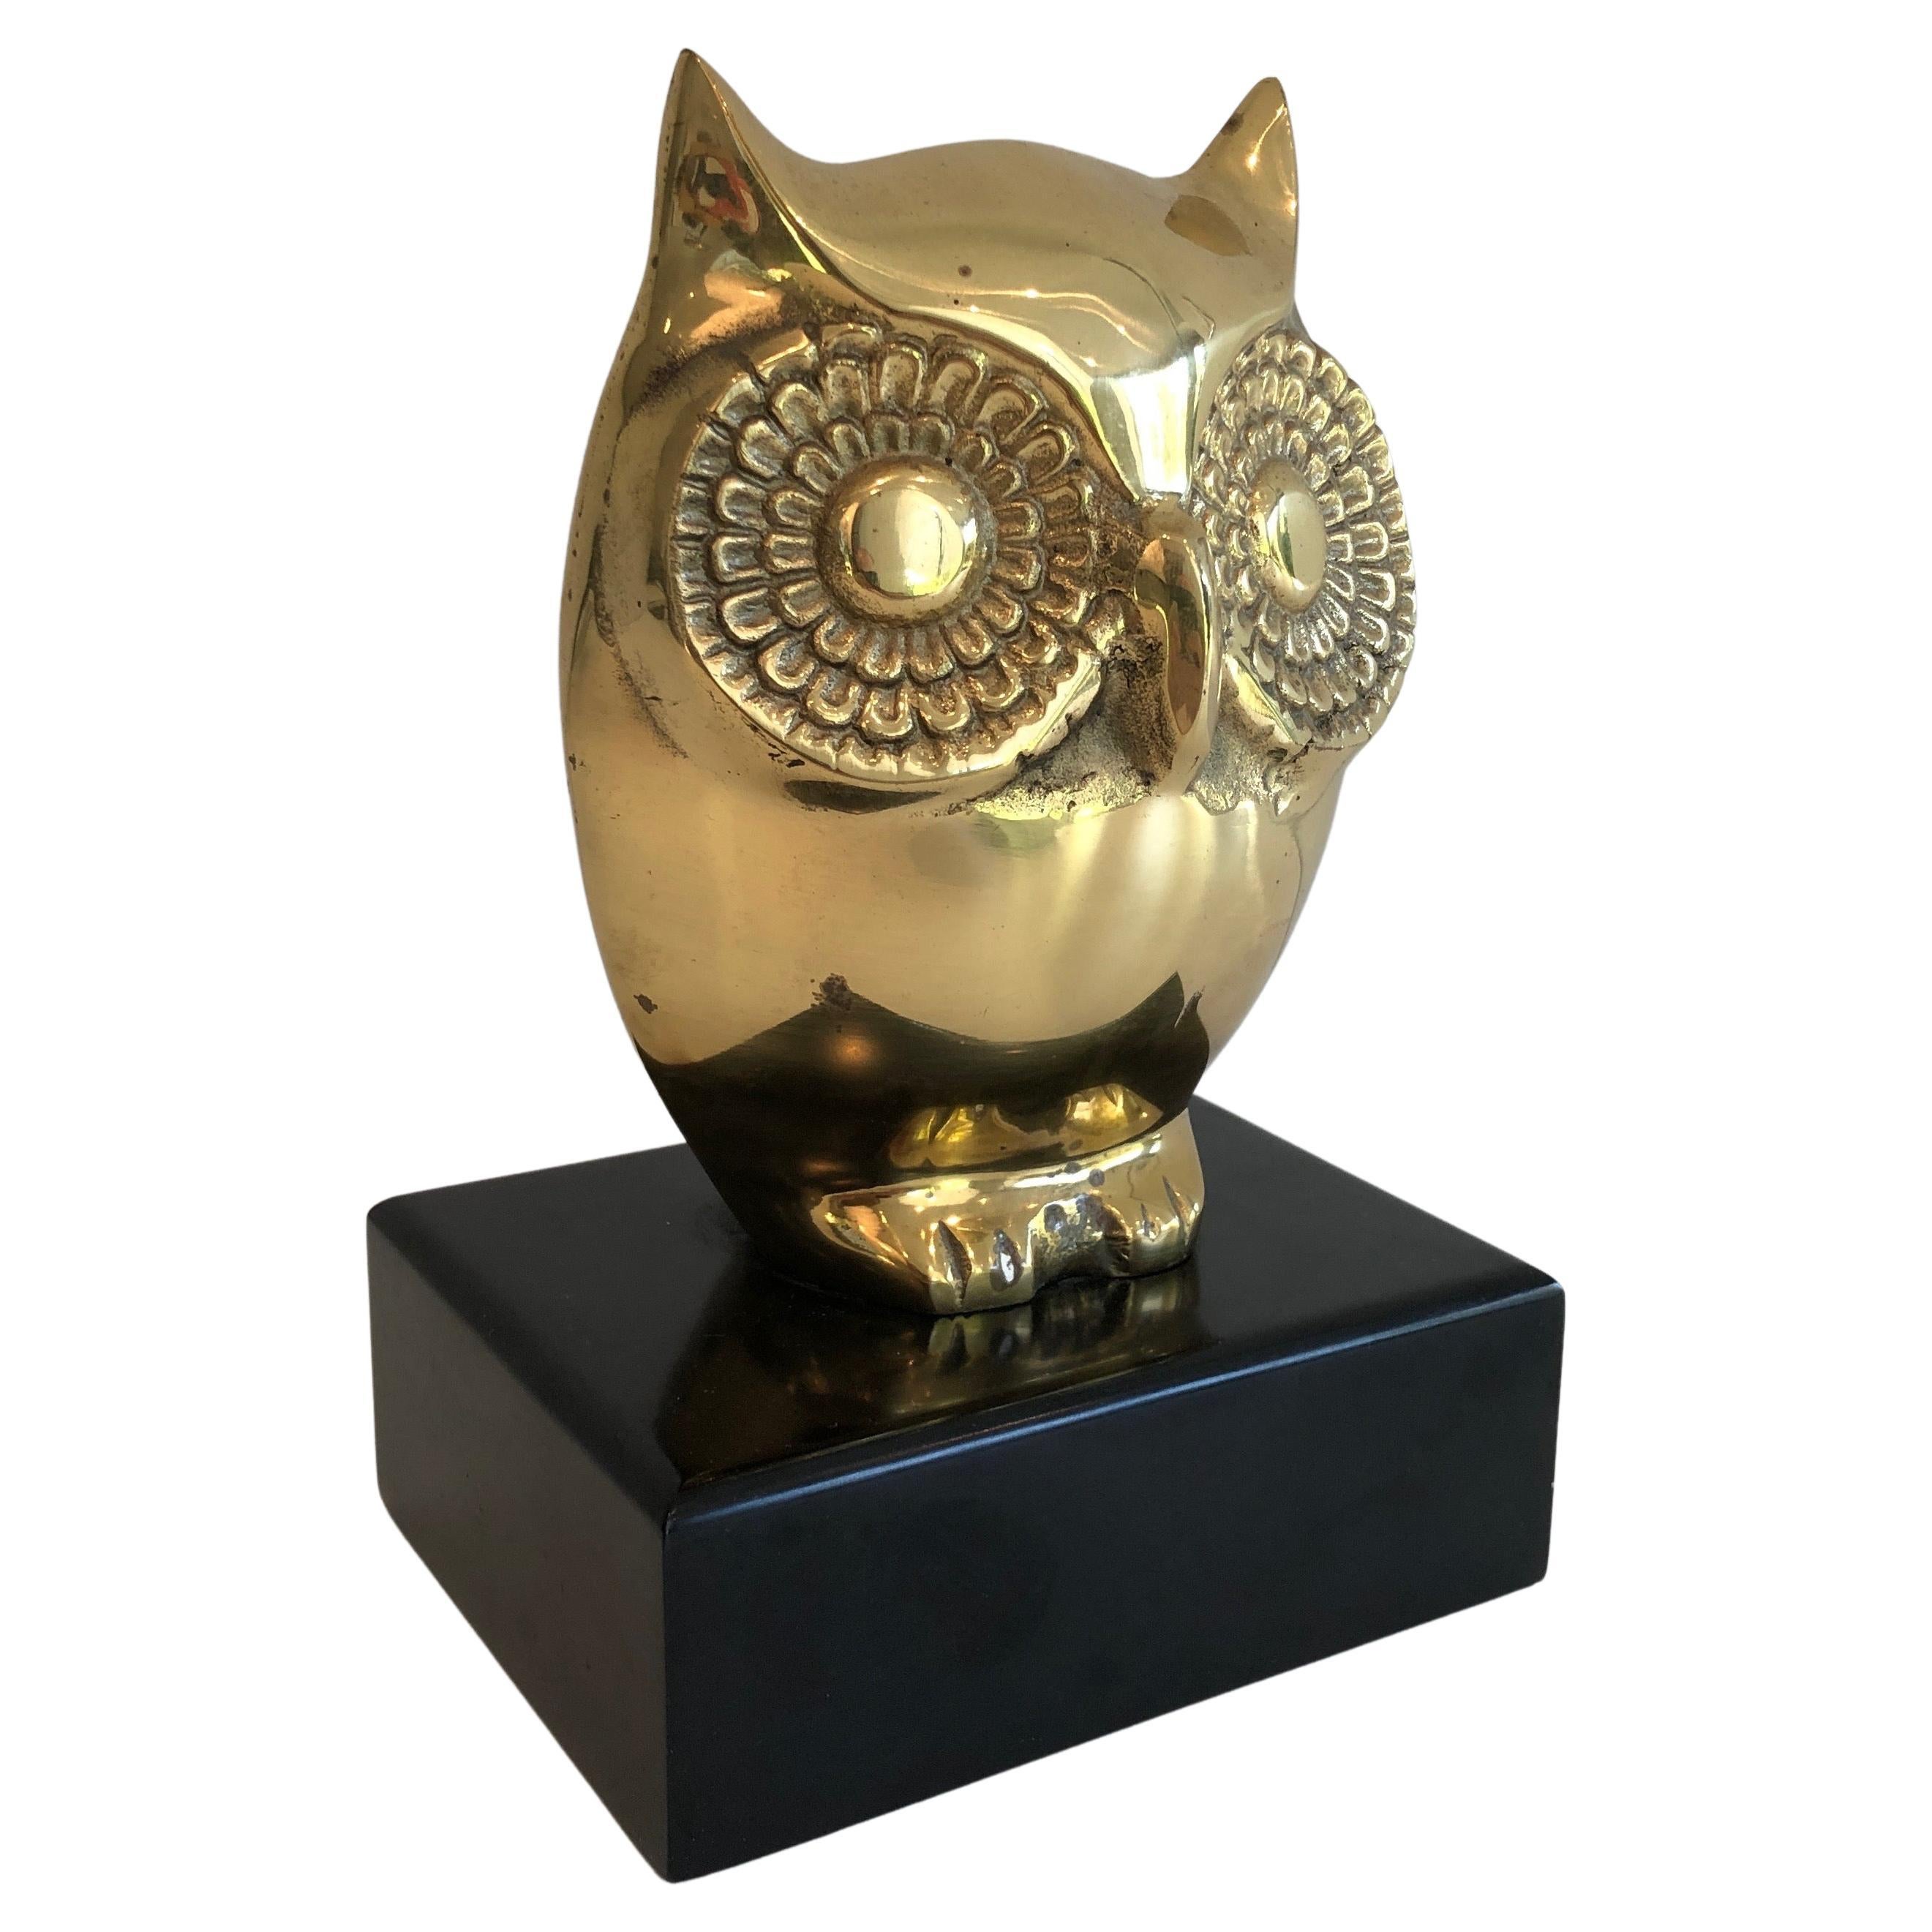  Brass Owl on Black Lacquered Wooden Stand, French, circa 1970